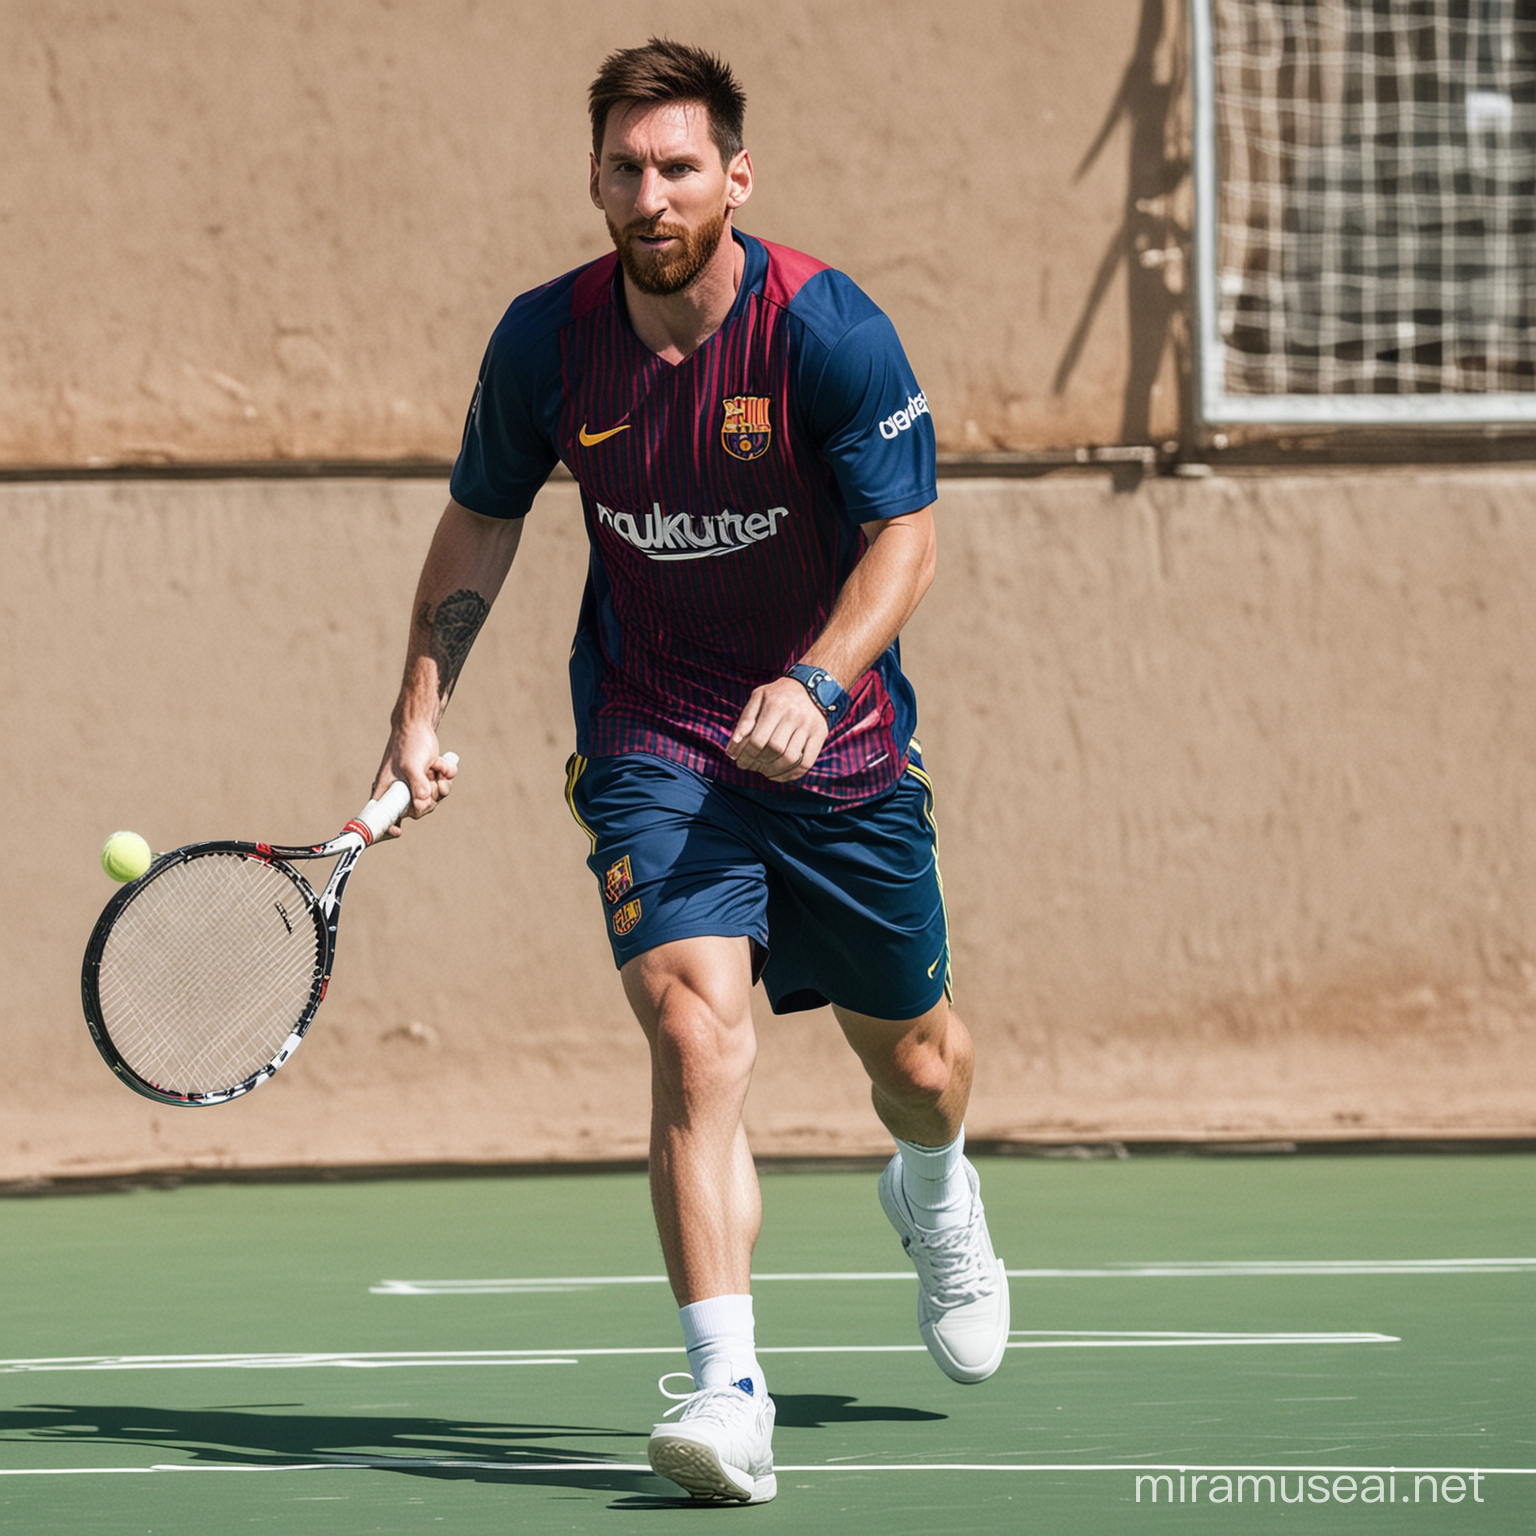 Athlete Lionel Messi Engaging in Tennis Match